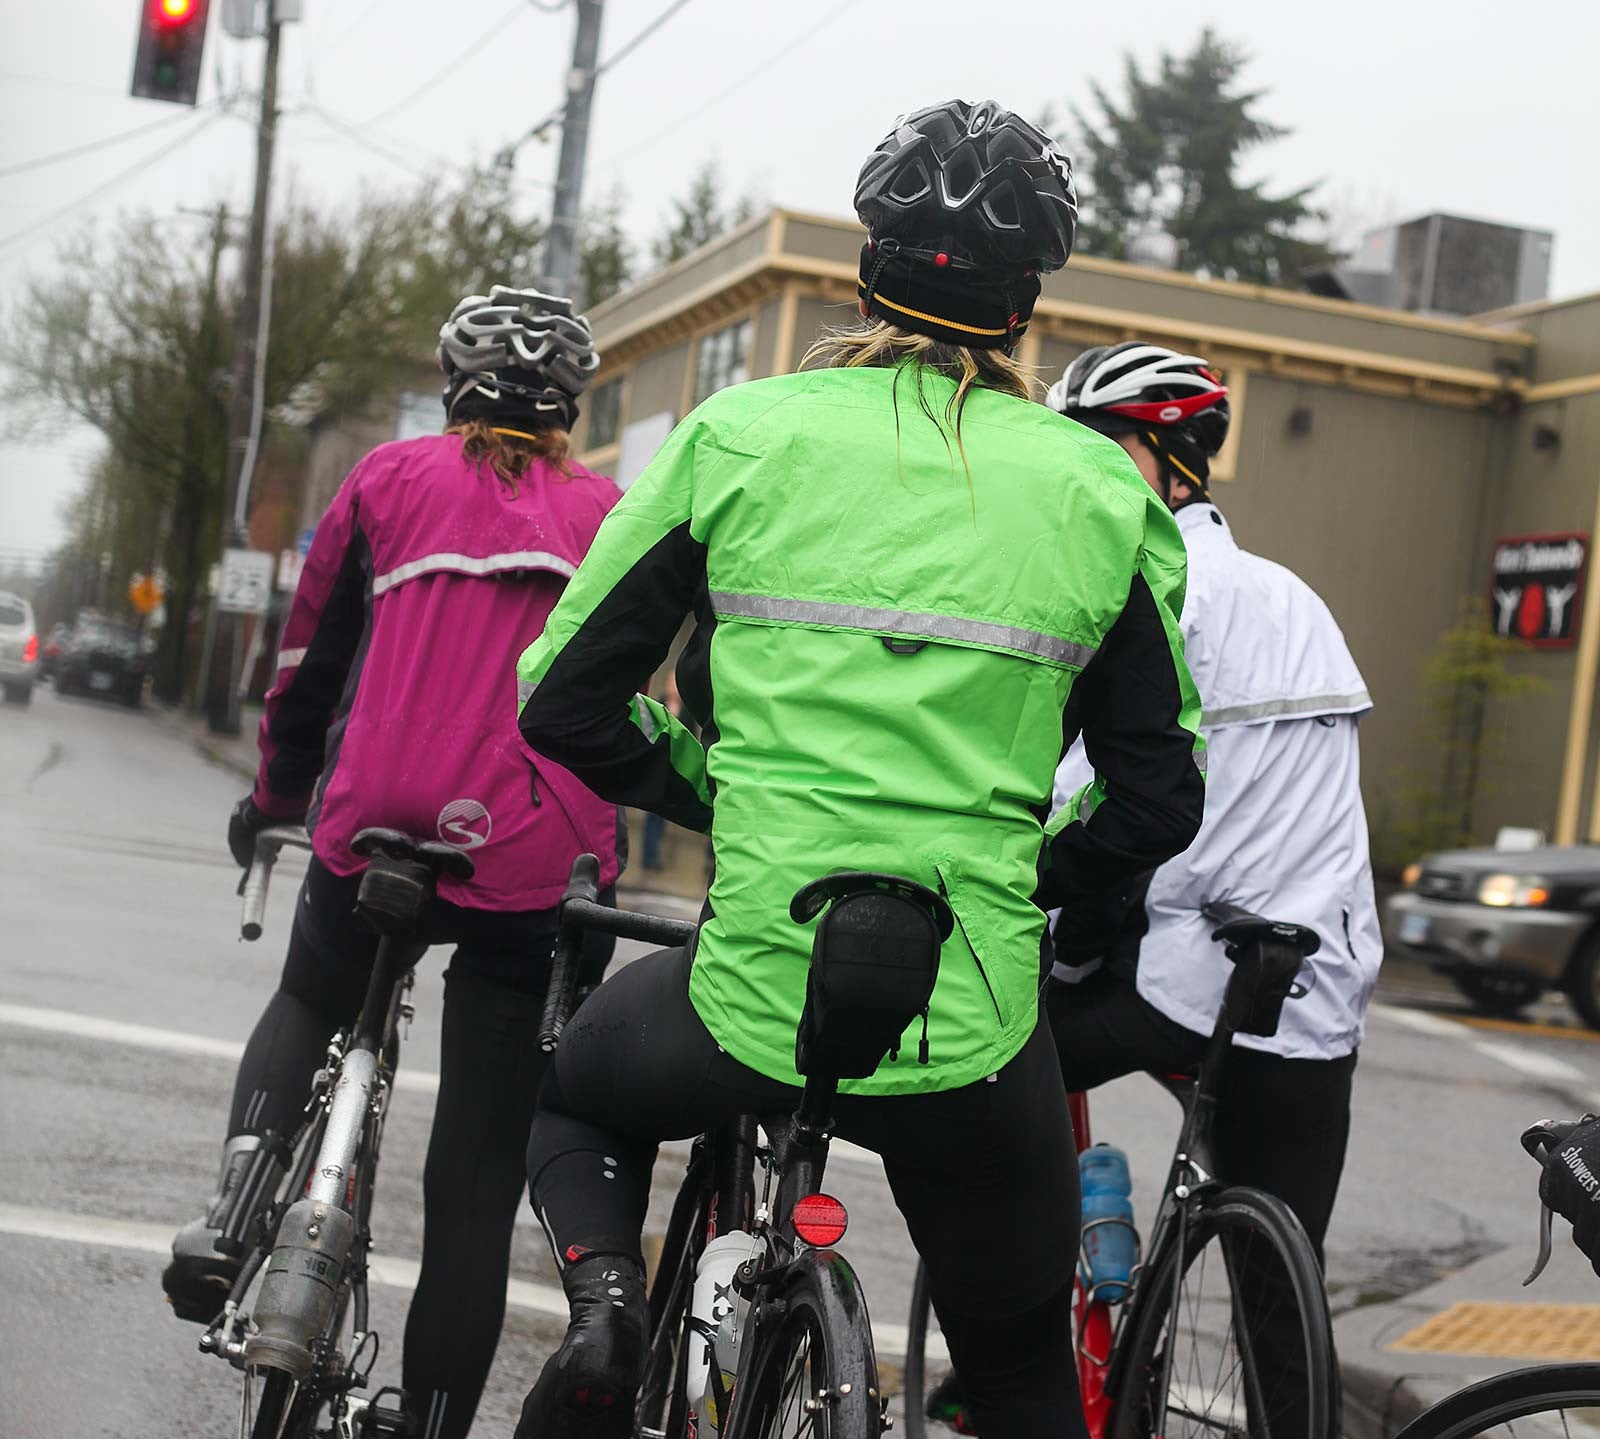 Get the proper gear for riding your bike in Spring Rain